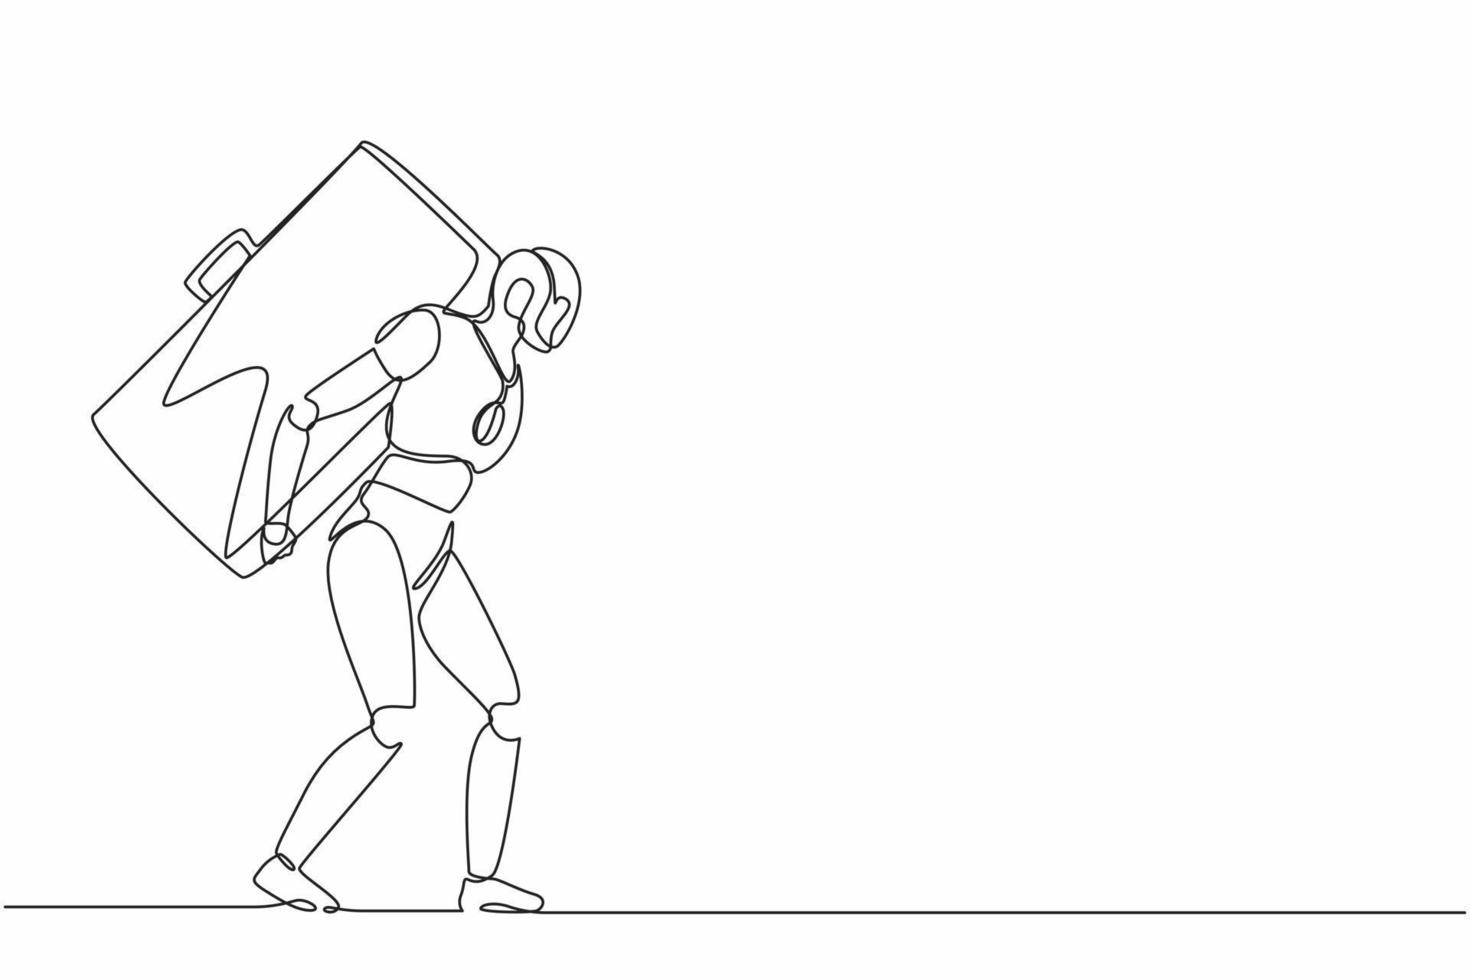 Continuous one line drawing robots standing and carrying heavy huge briefcase. Humanoid robot cybernetic organism. Future robotics development concept. Single line design vector graphic illustration